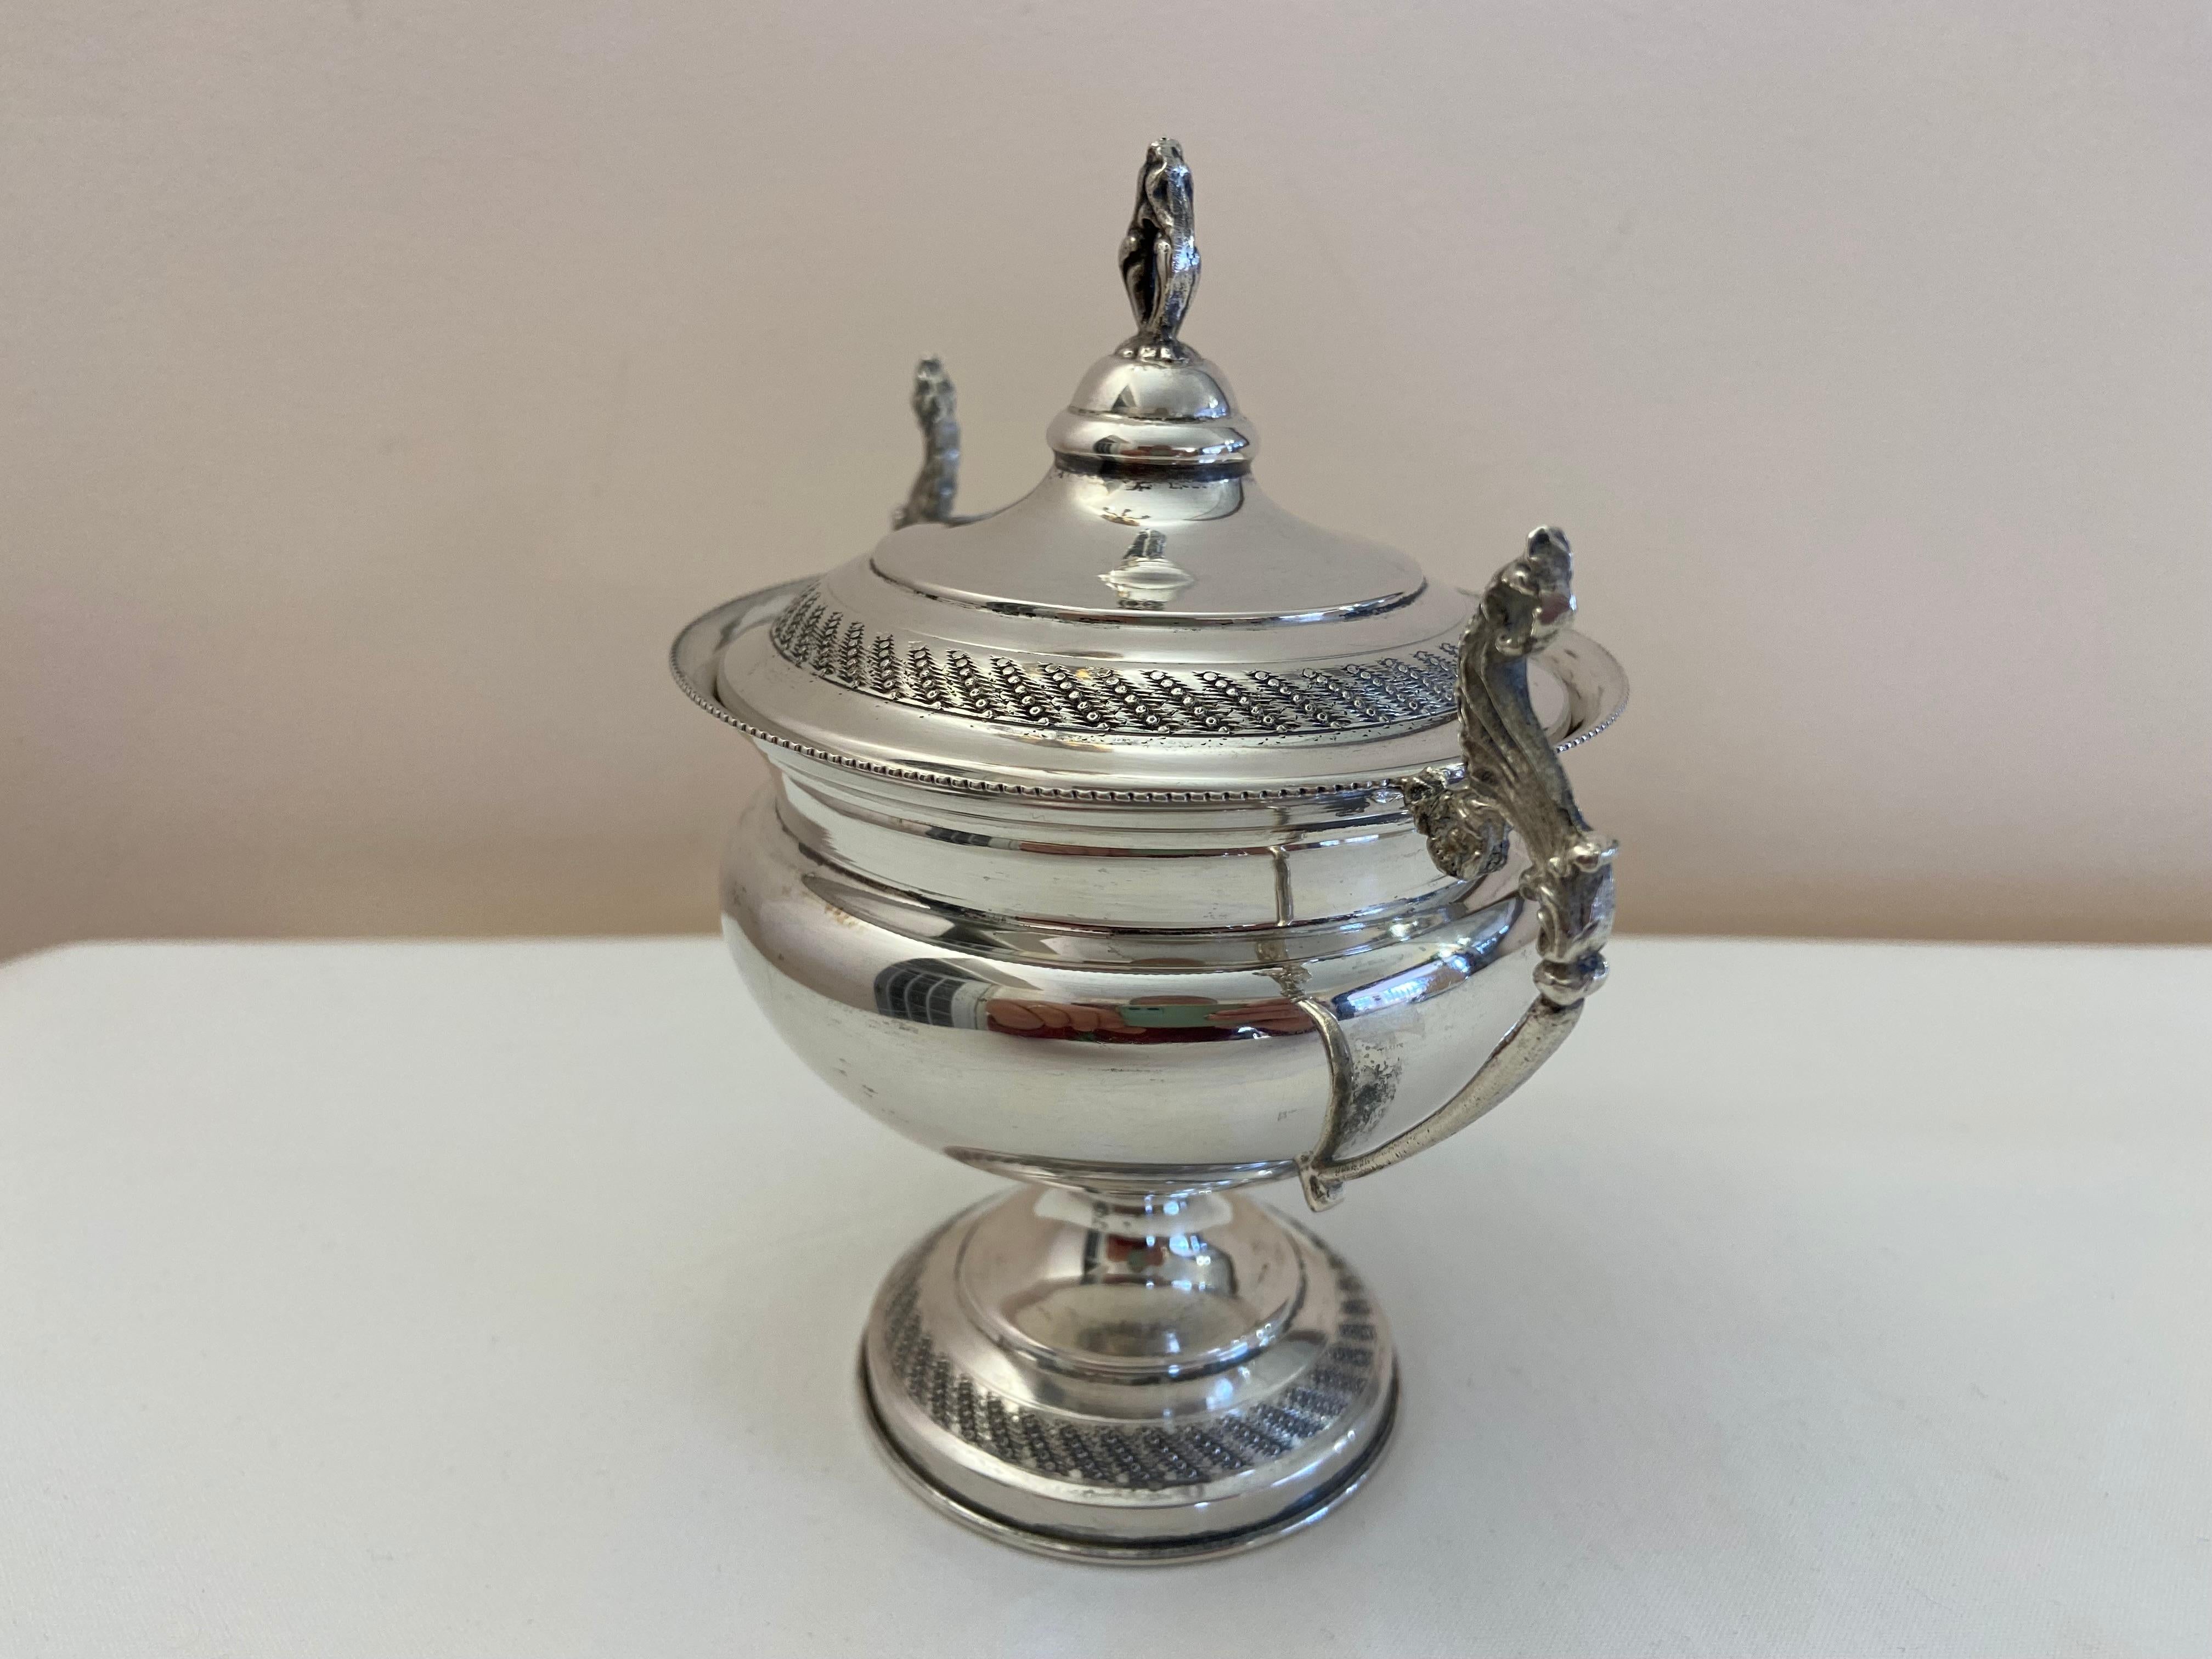 800 silver sugar bowl.
Excellent condition, weighs 170 grams and measures 14 cm by 15 in height.
I ship in an elegant gift box.